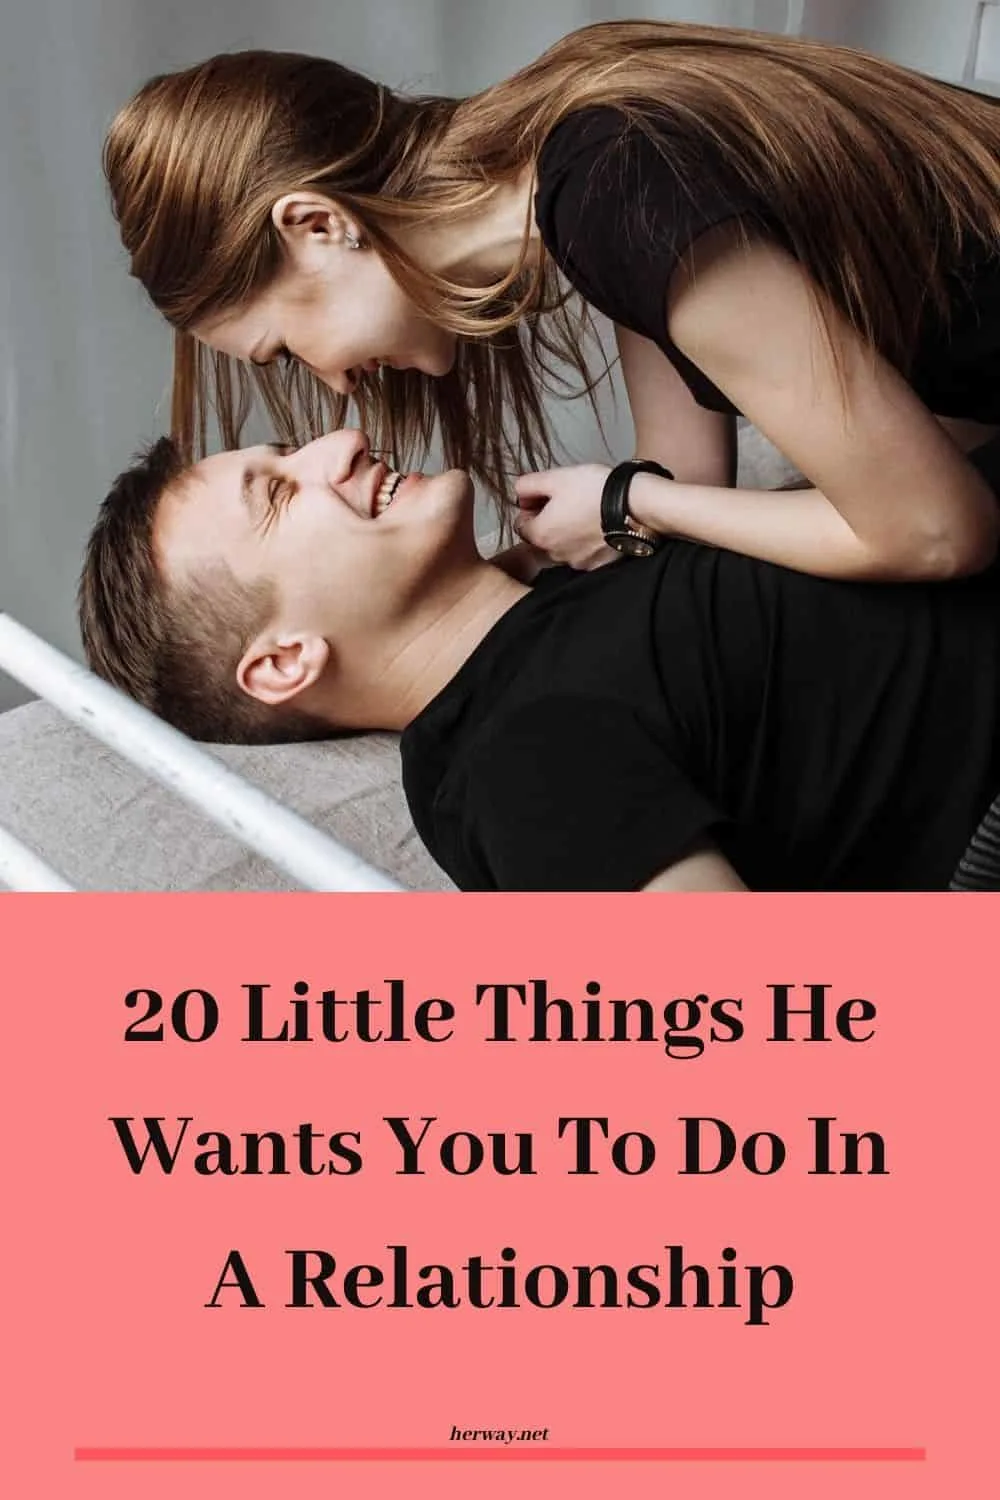 20 Little Things He Wants You To Do In A Relationship